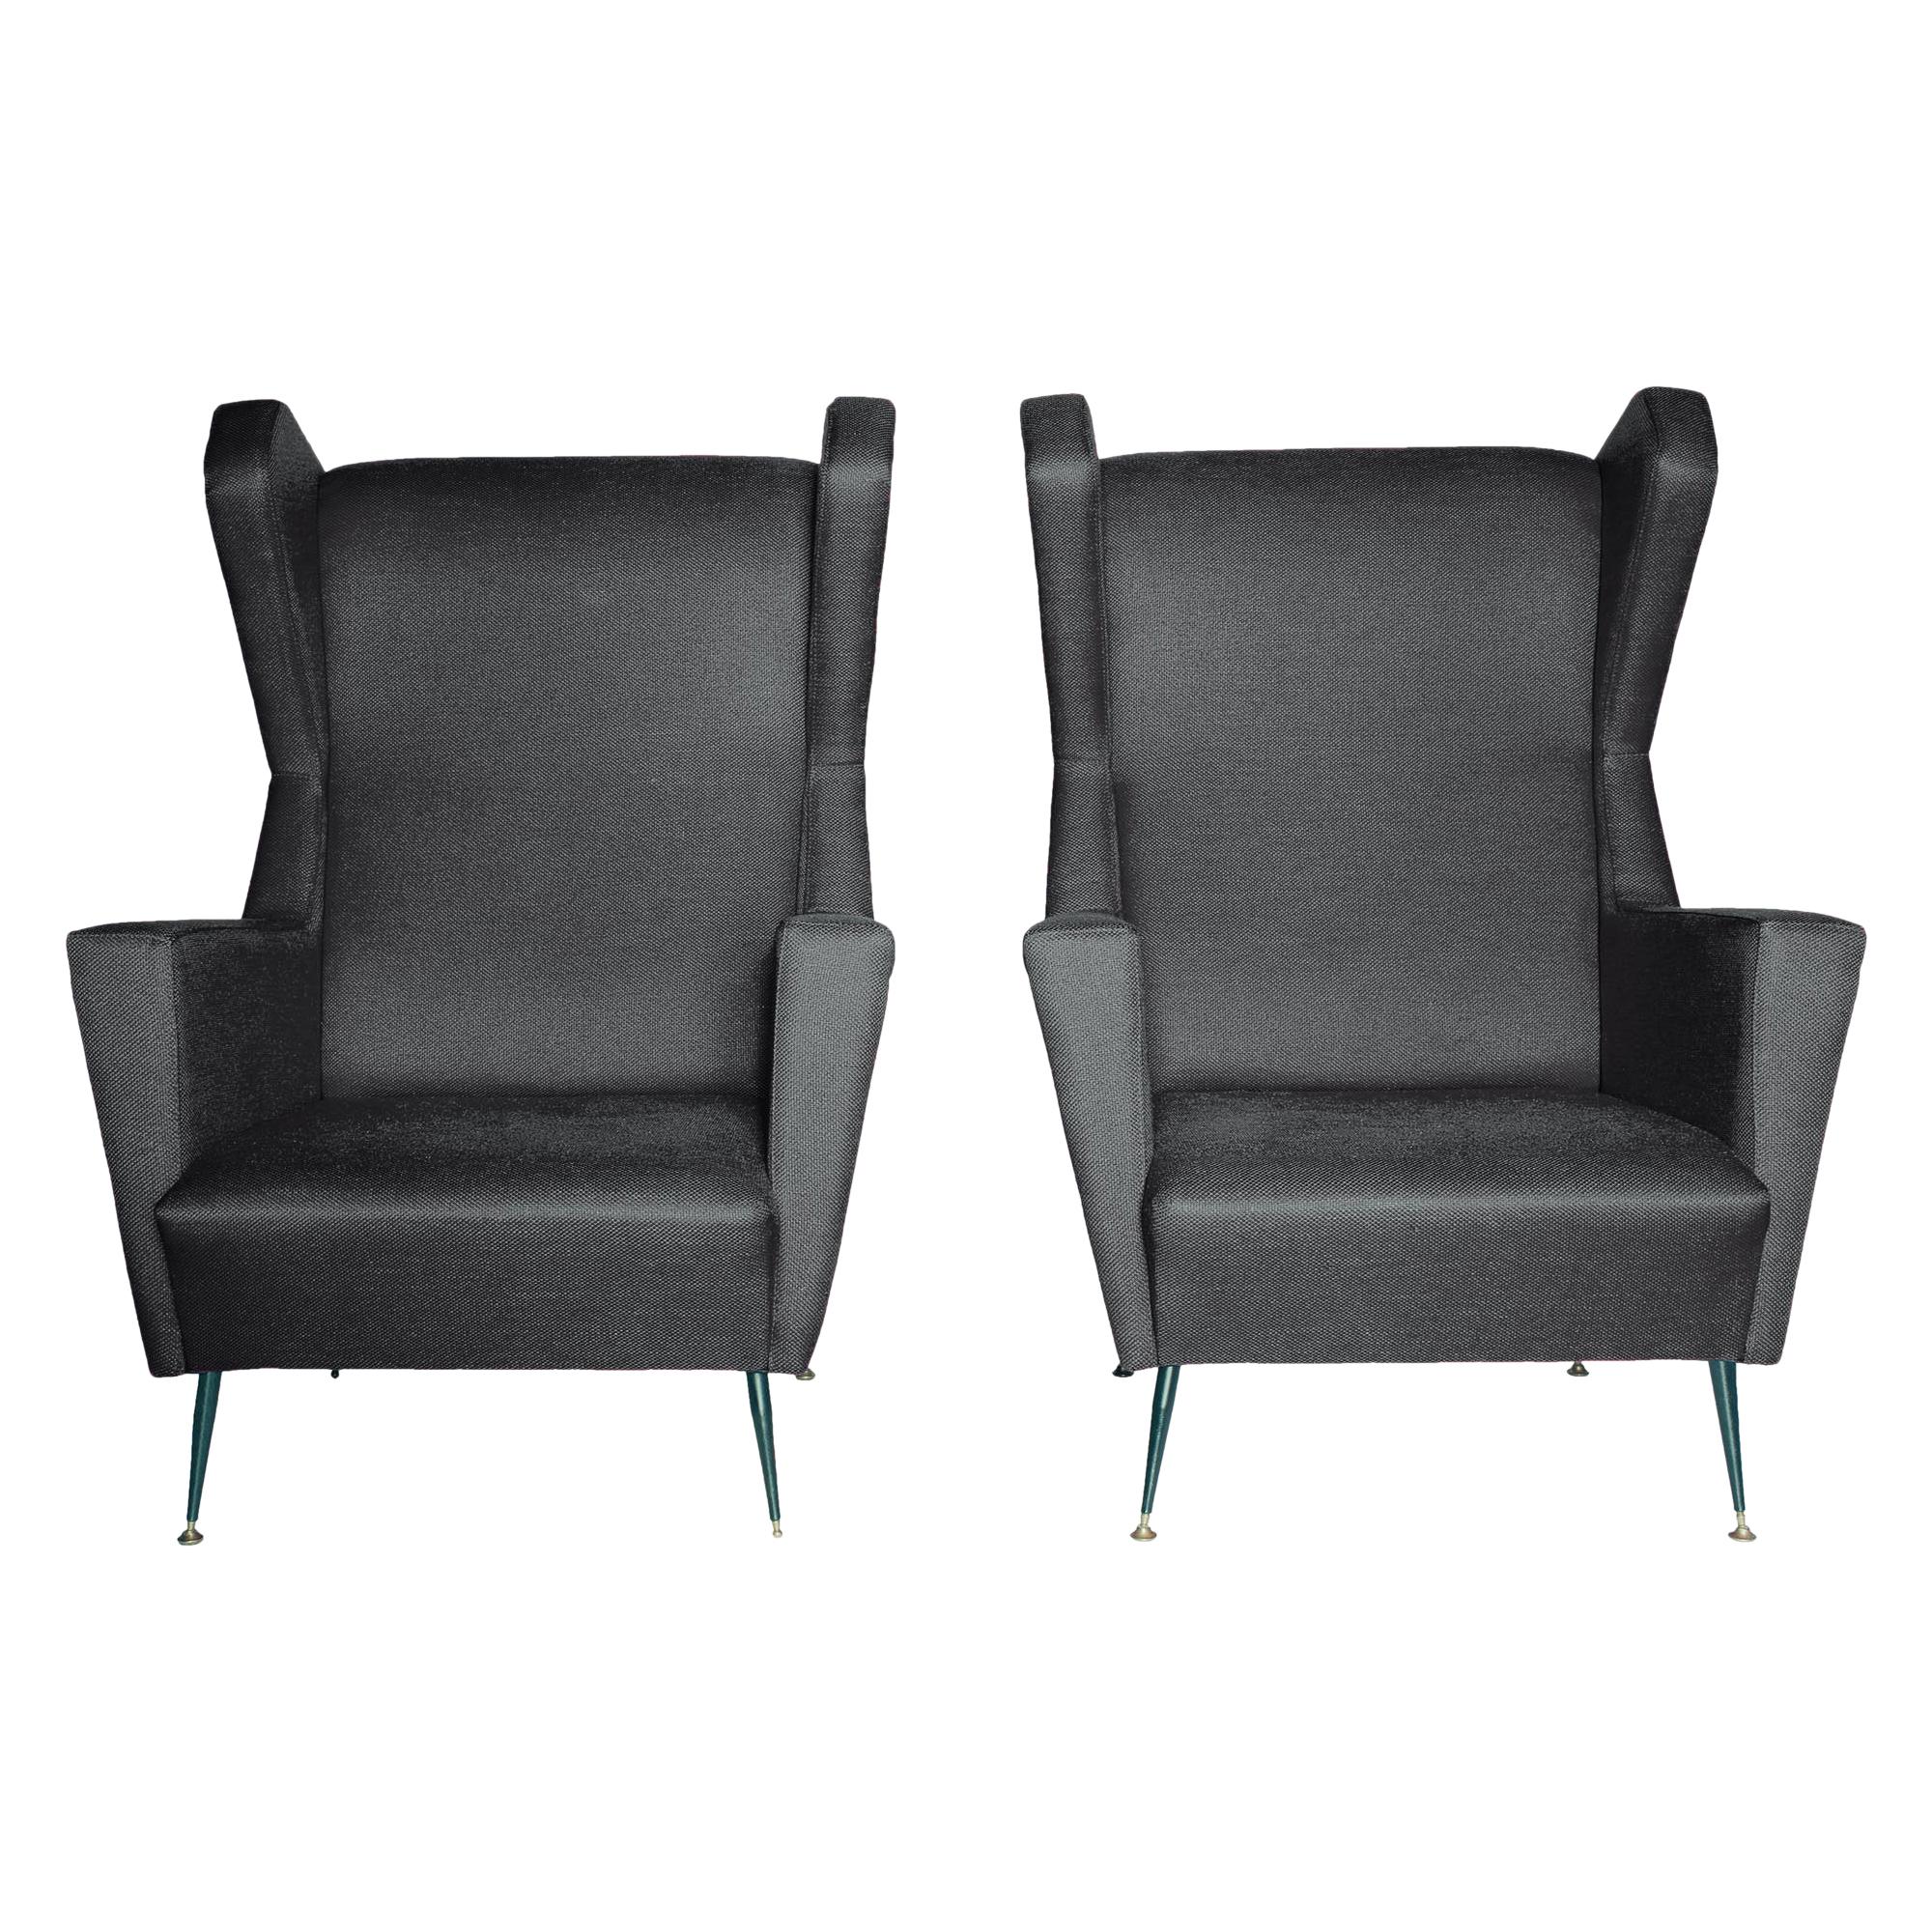 Vintage 1950s Upholstered Gio Ponti Italian Wing Chairs, Pair For Sale